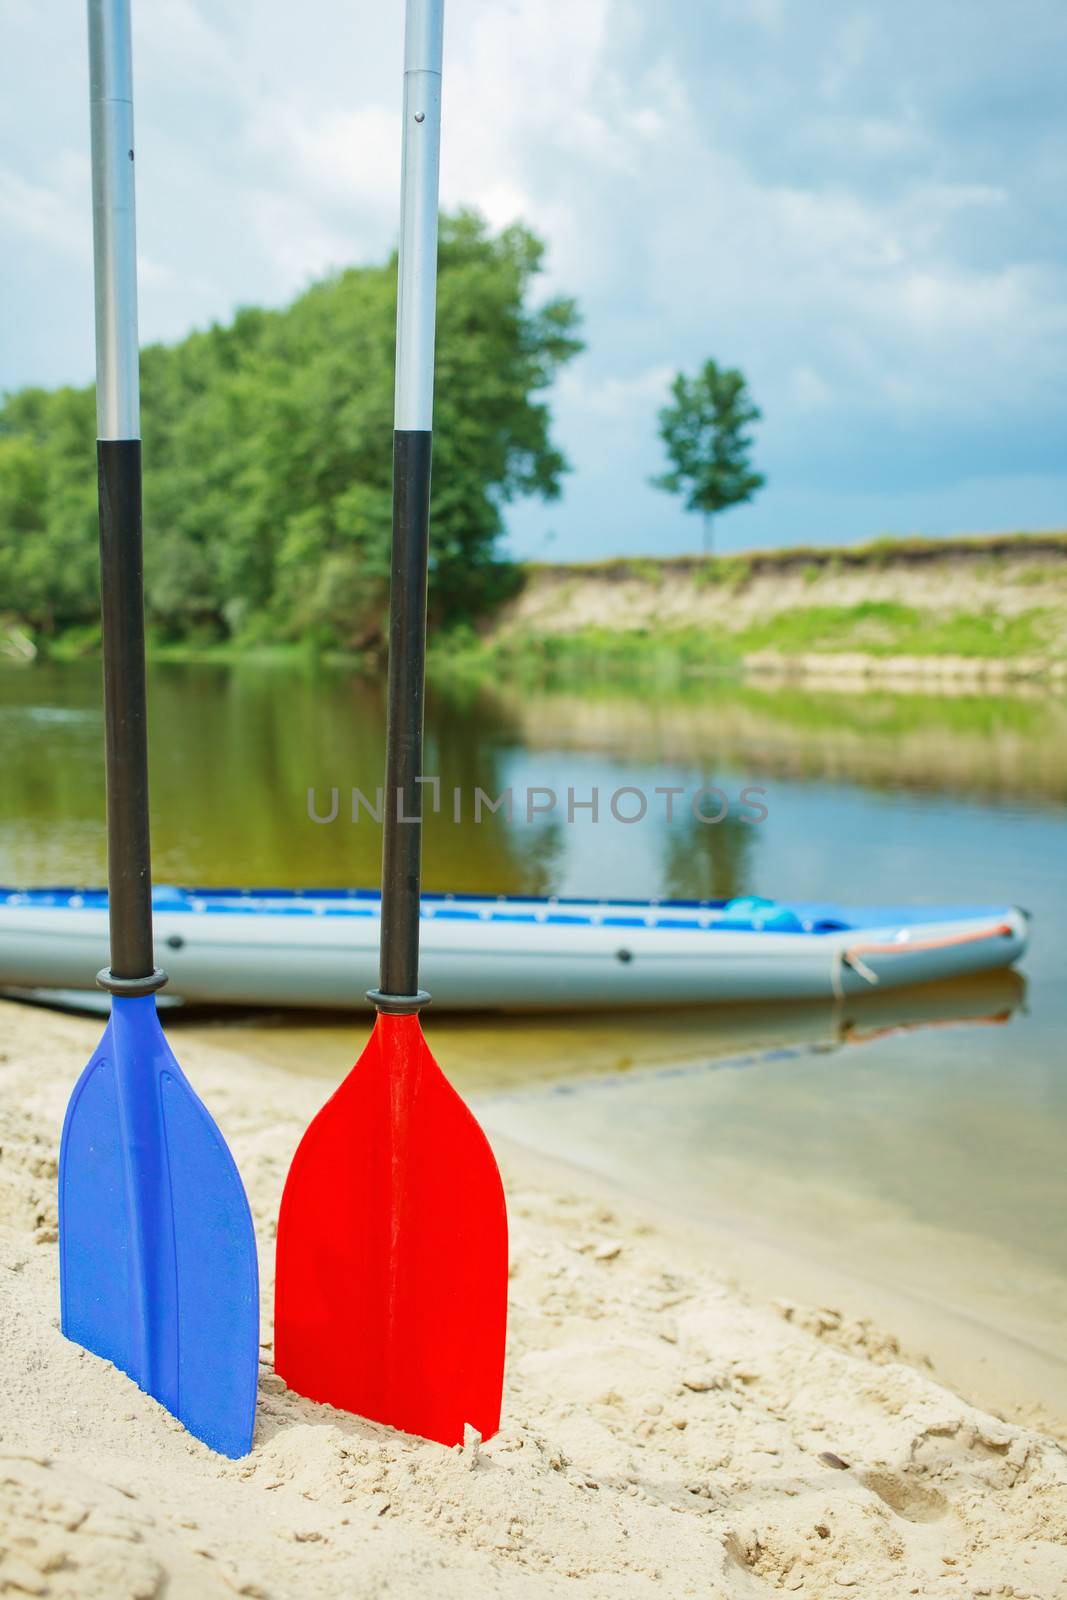 Red and blue paddles for white water rafting and kayaking